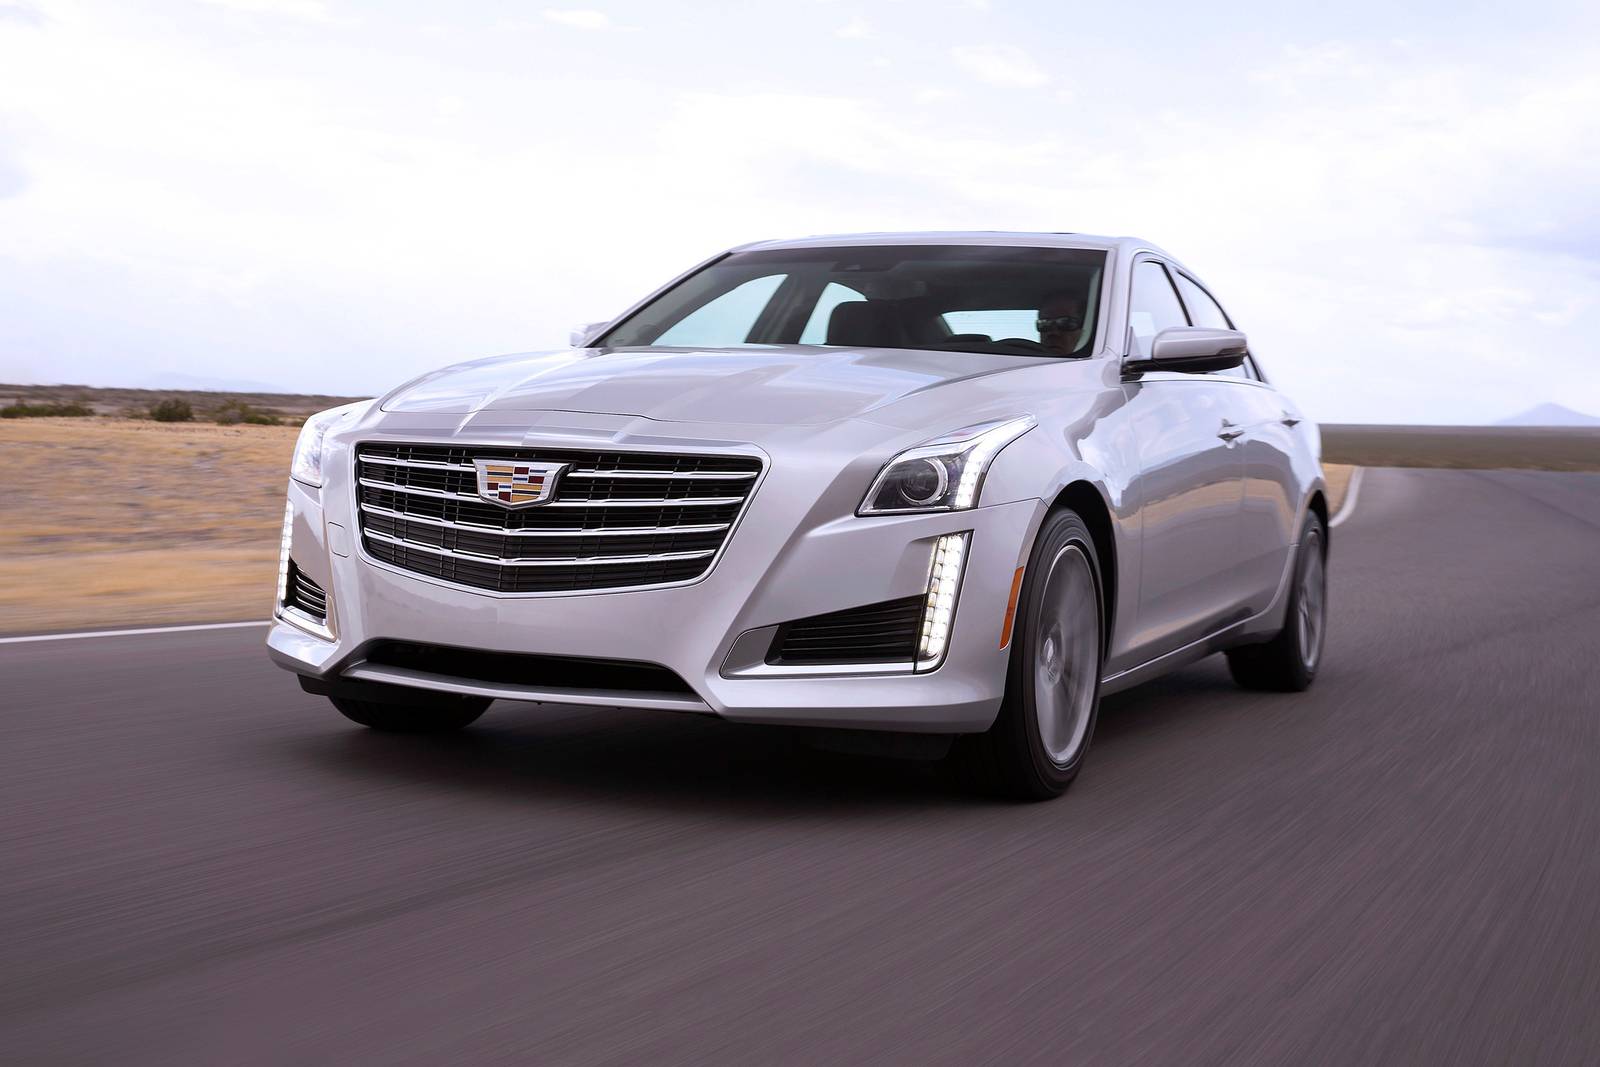 2019 Cadillac CTS Review & Ratings | Edmunds